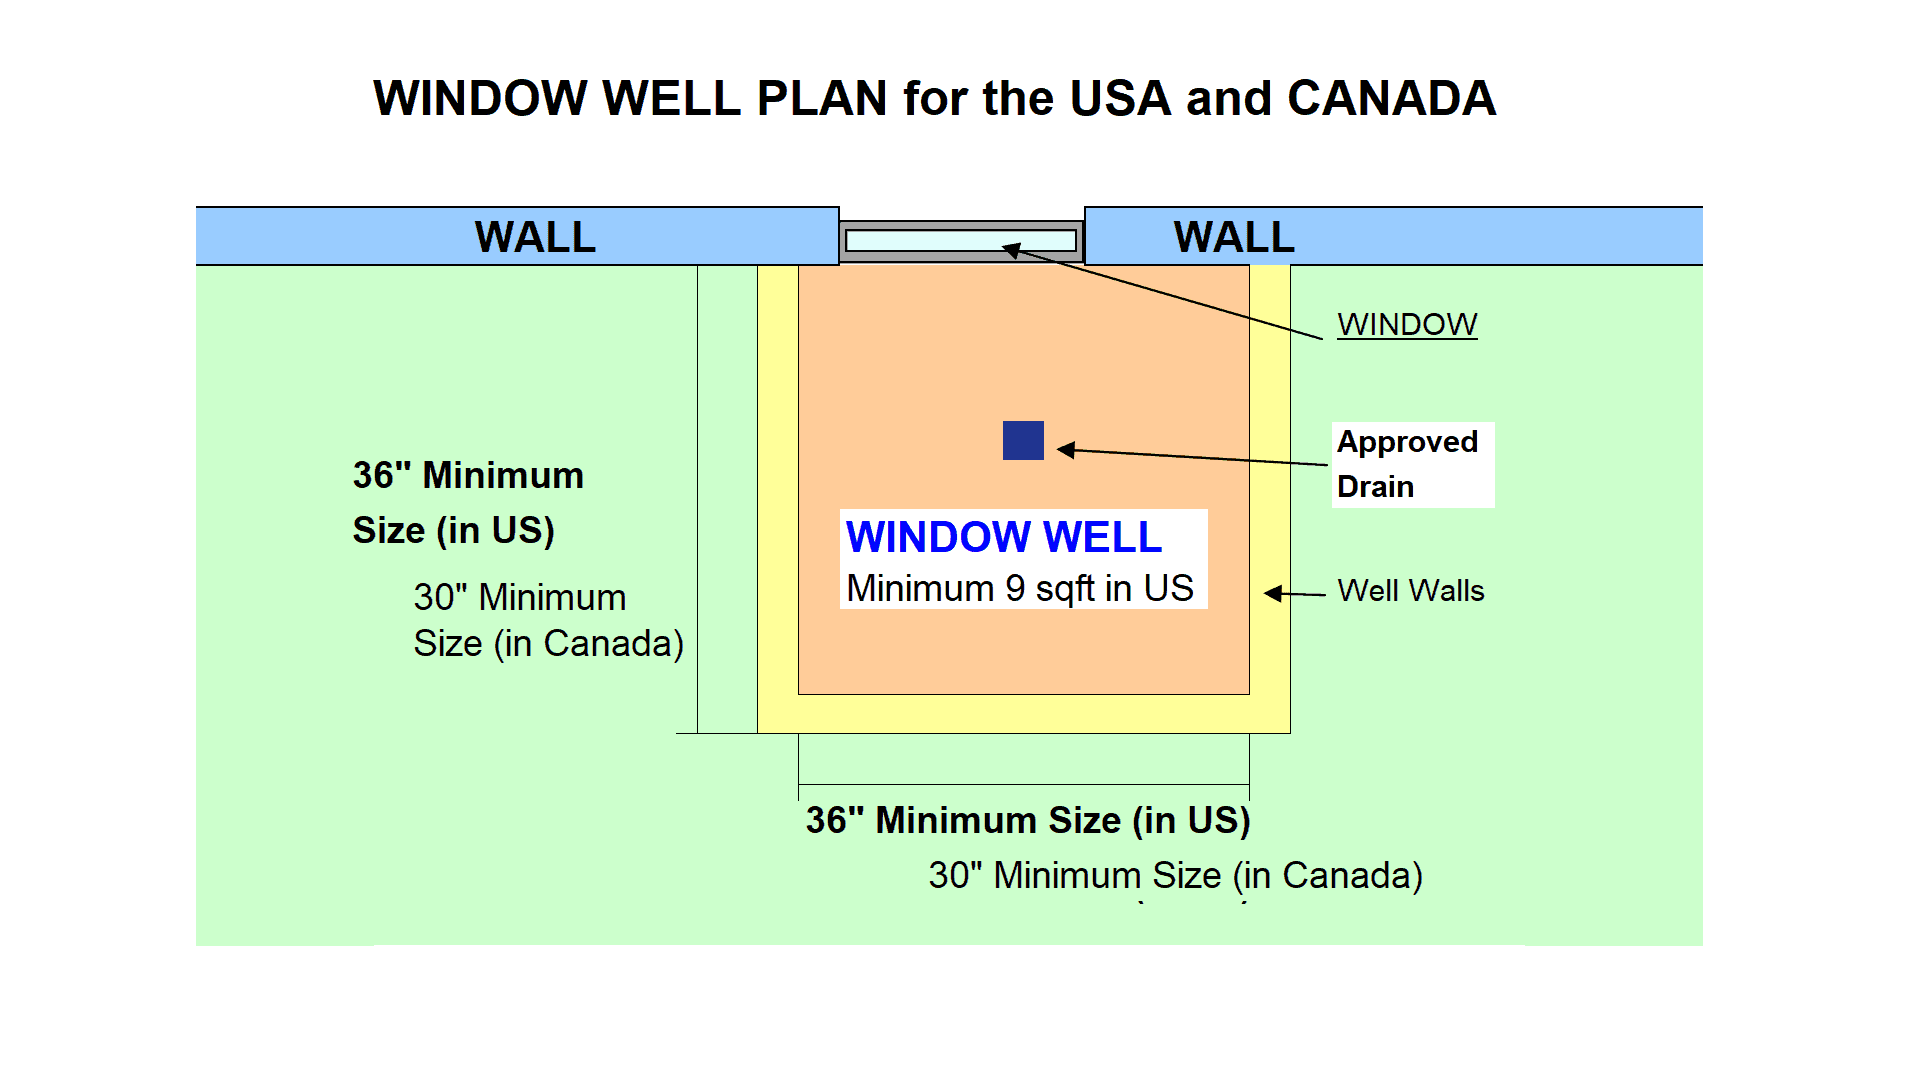 Window Well's Plan requirements in USA and Canada. Applicable for the European windows.